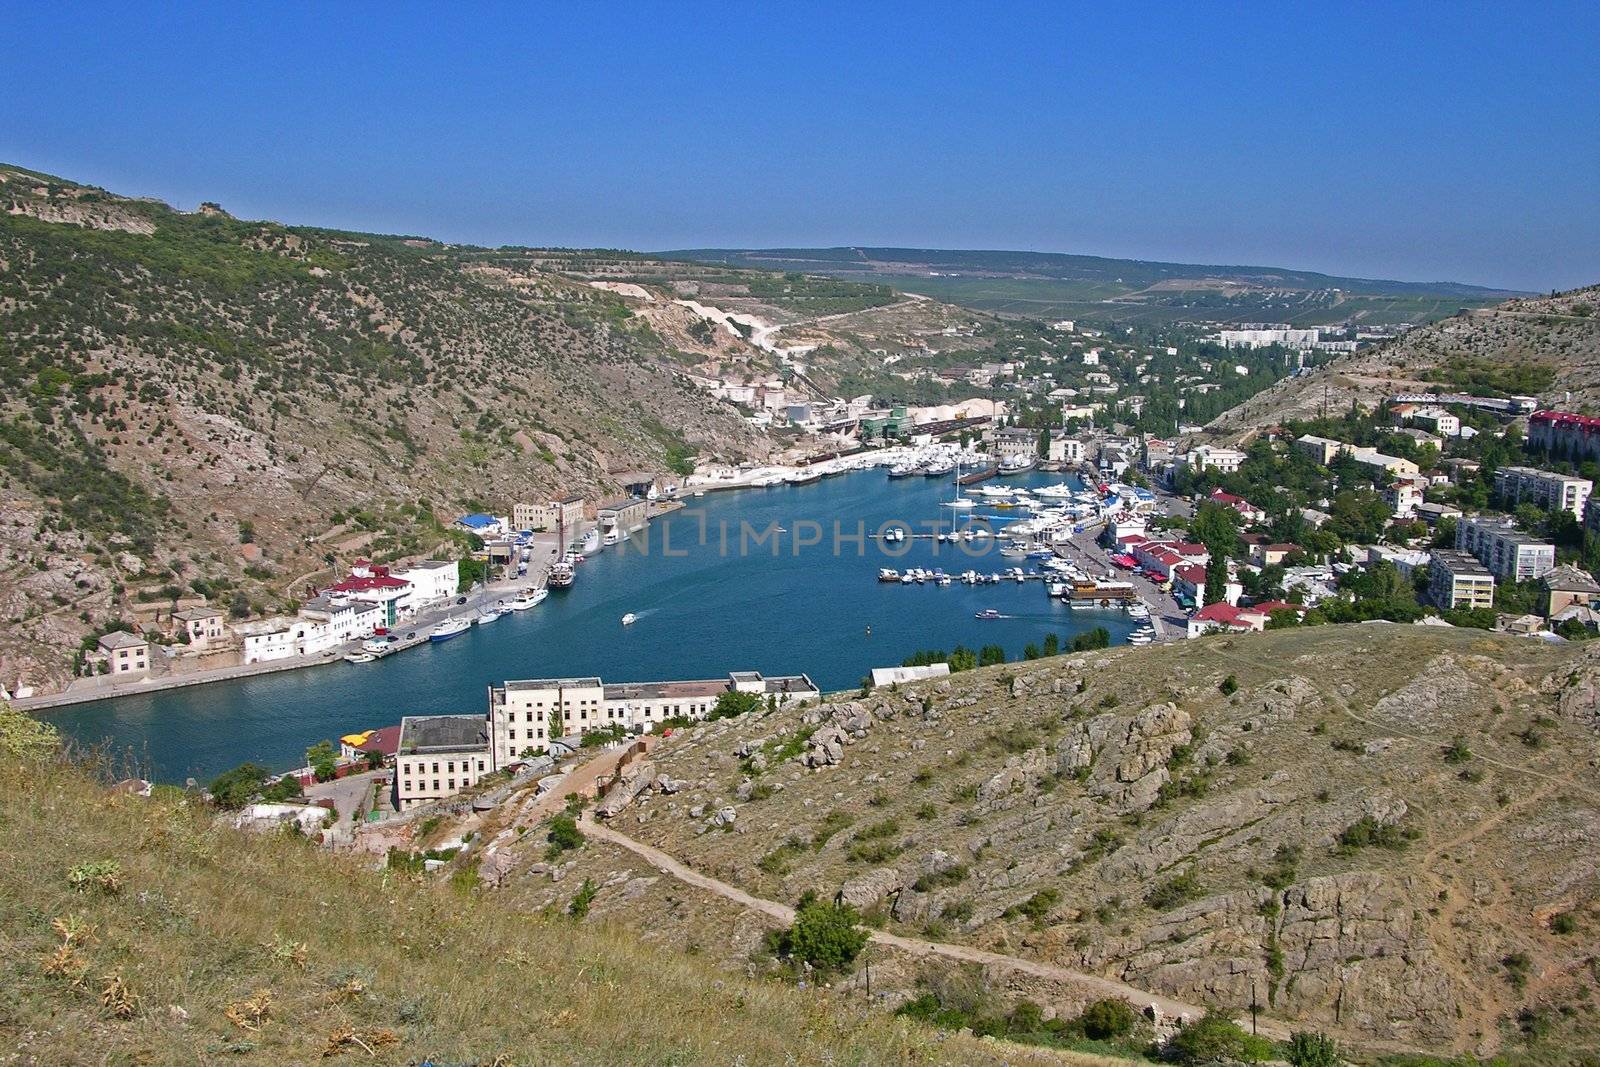 Balaklava town and bay. View from above.